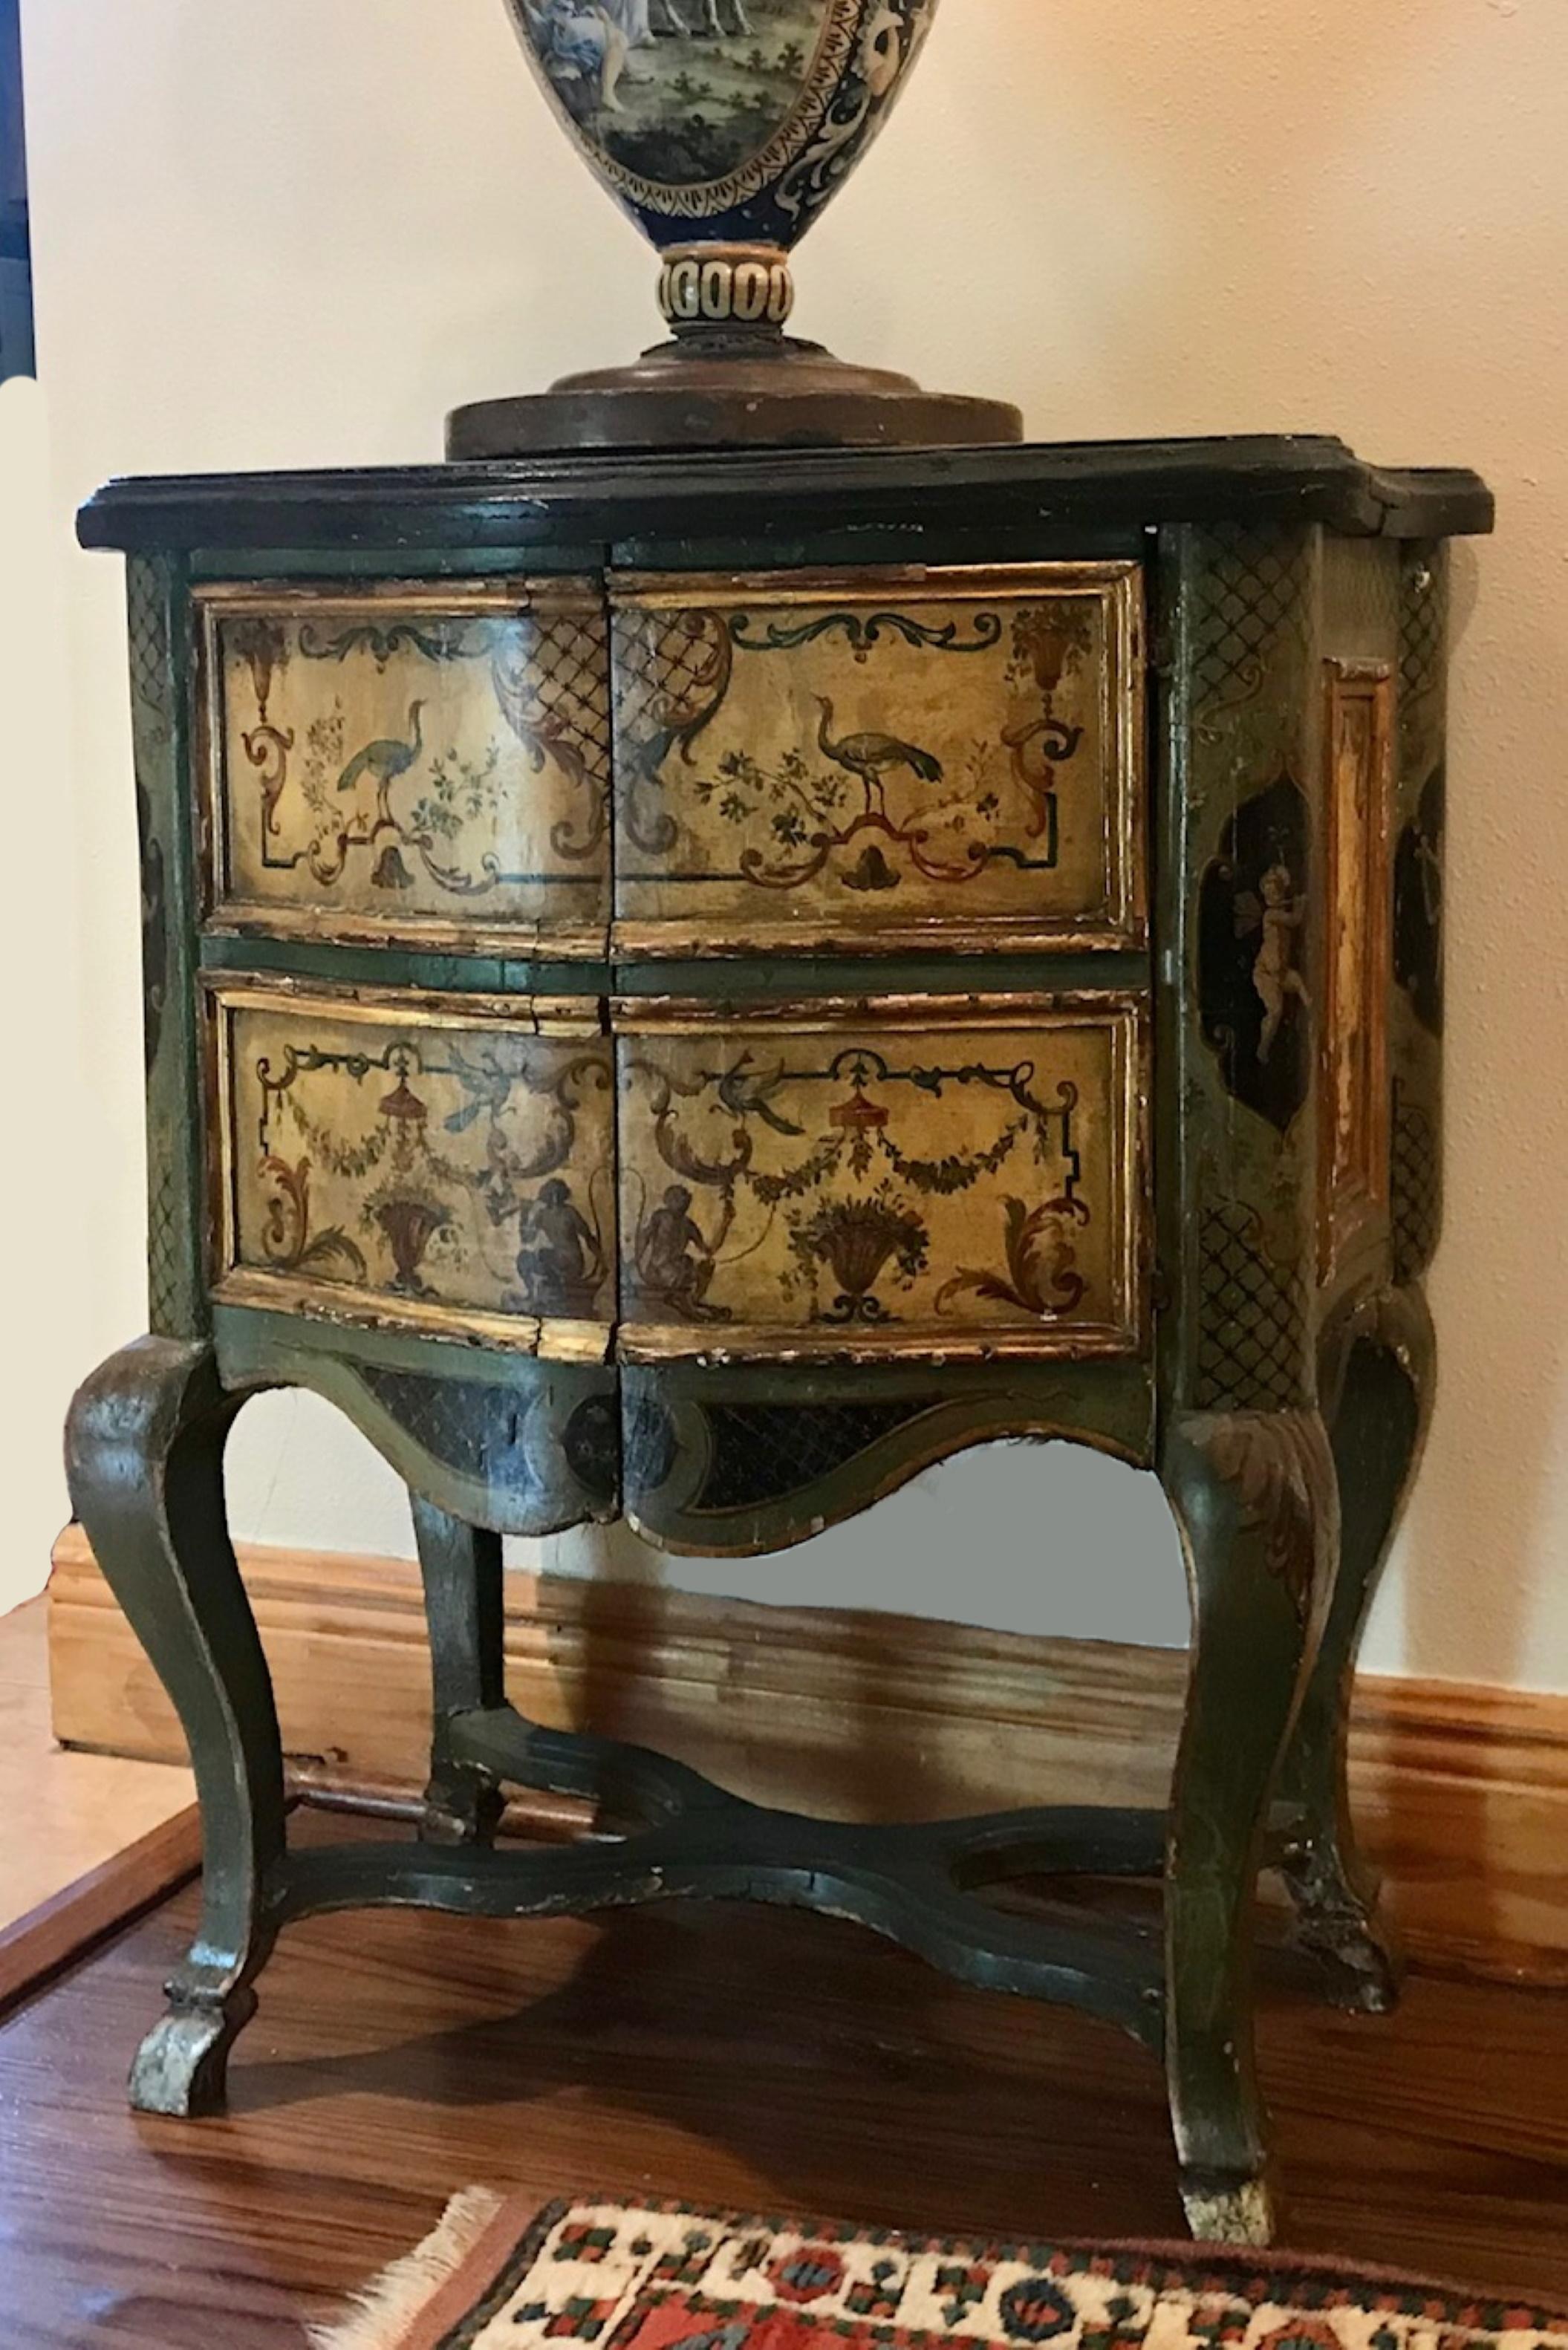 Extremely rare Italian Rococo “Lacca Comodino”, 17th-18th century, Venice

Chamber pot lift-top bedside commode with polychrome painted decoration. This beautiful furniture has a lift up top, revealing an interior covered in red satin in period